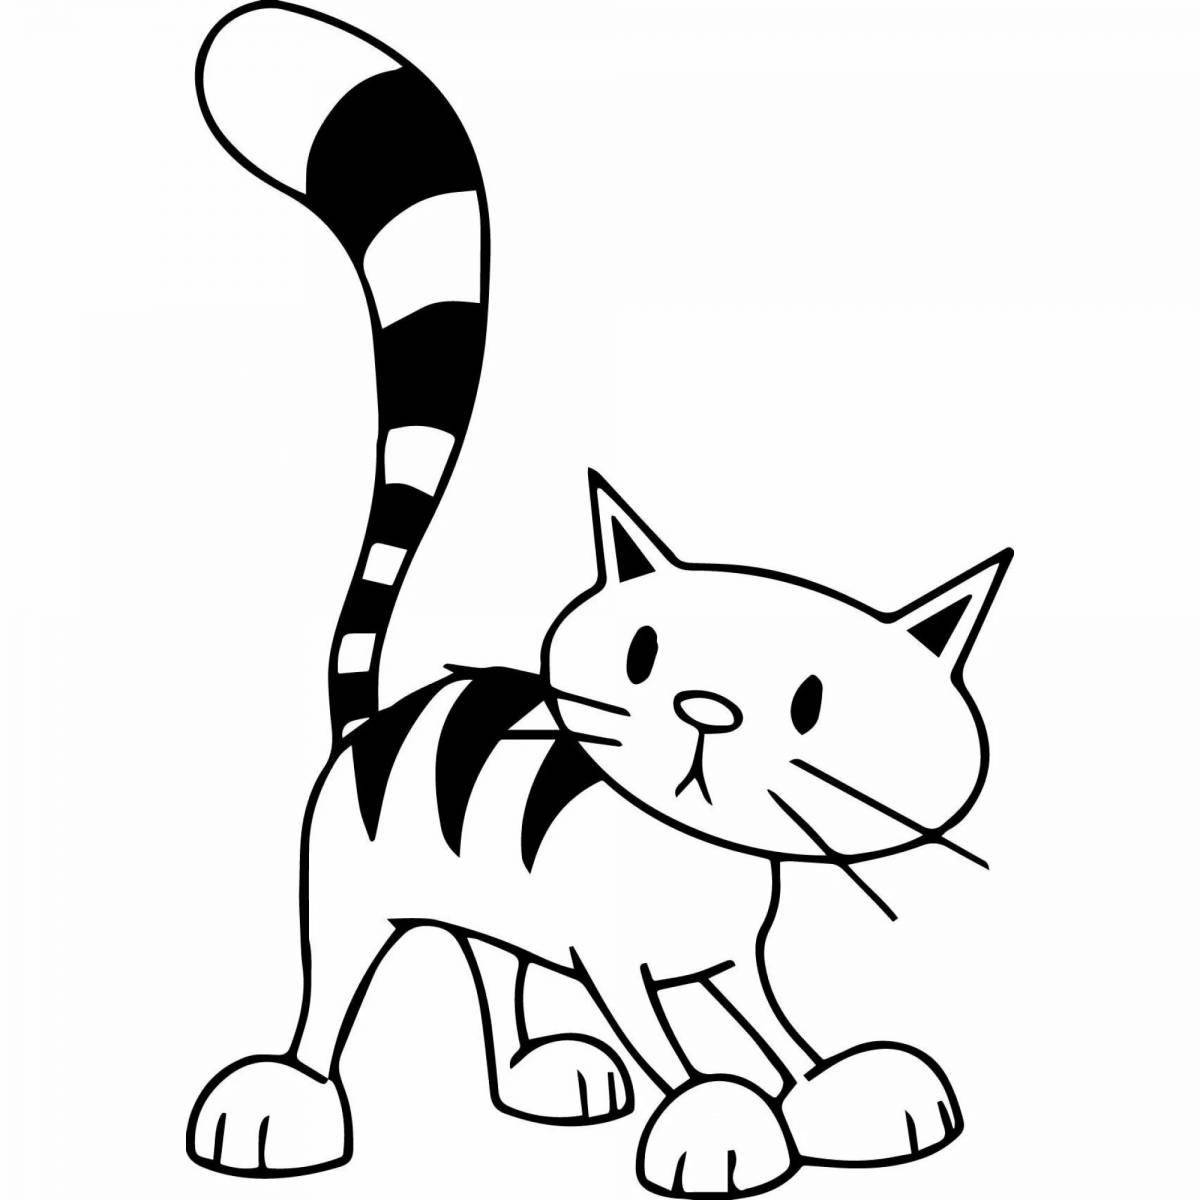 Cunning tabby cat coloring page